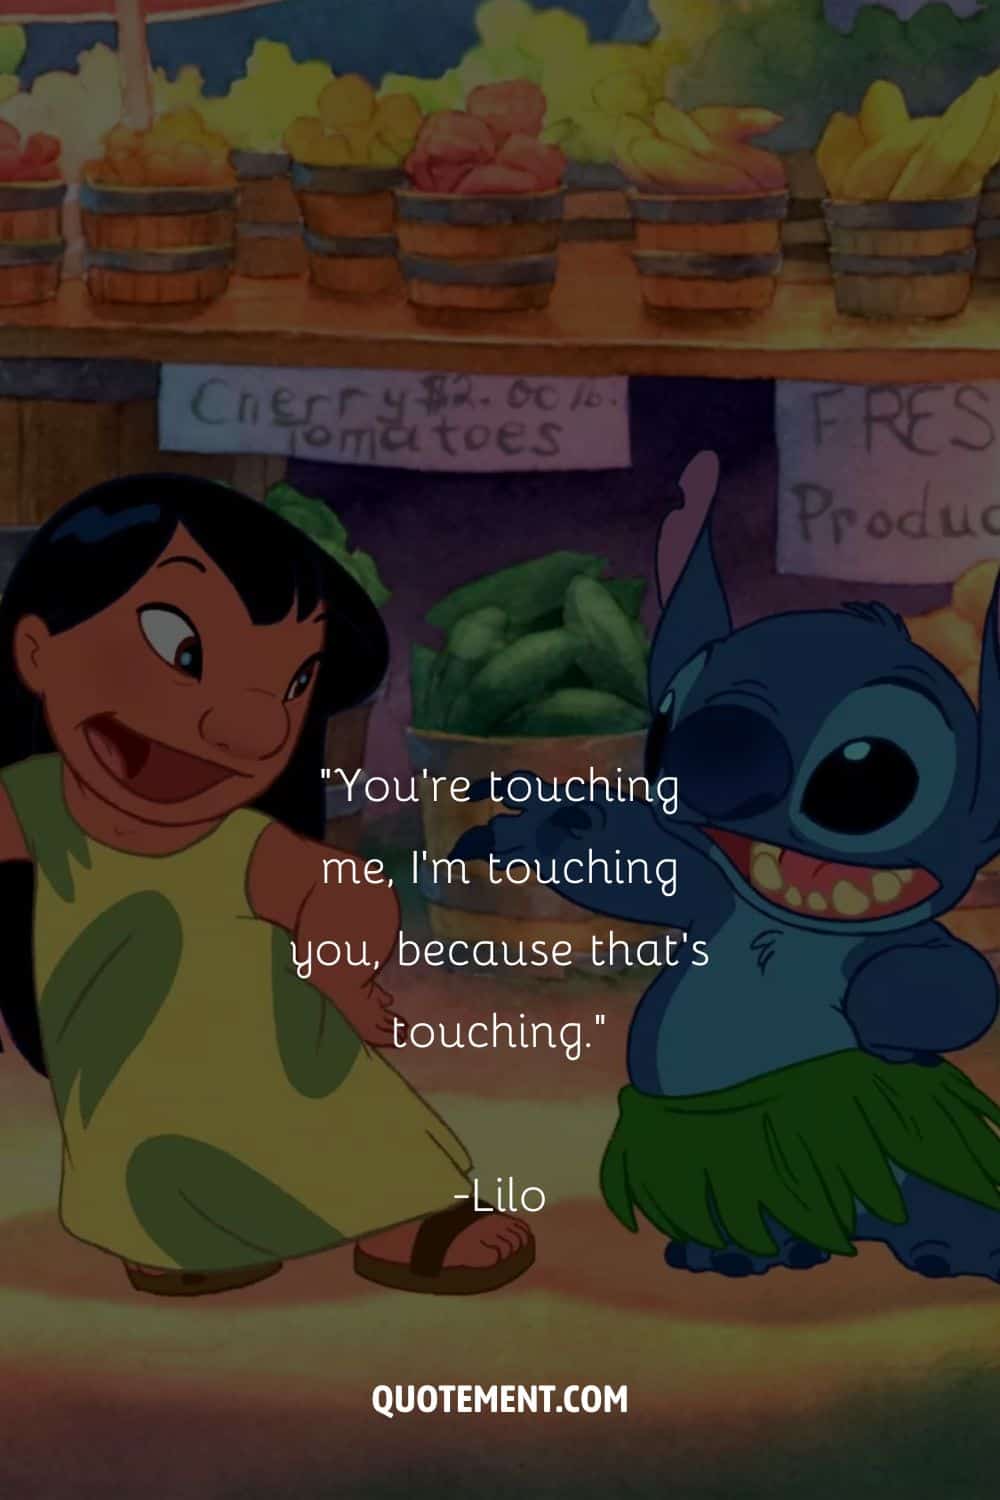 Lilo and Stitch at the fruit stand